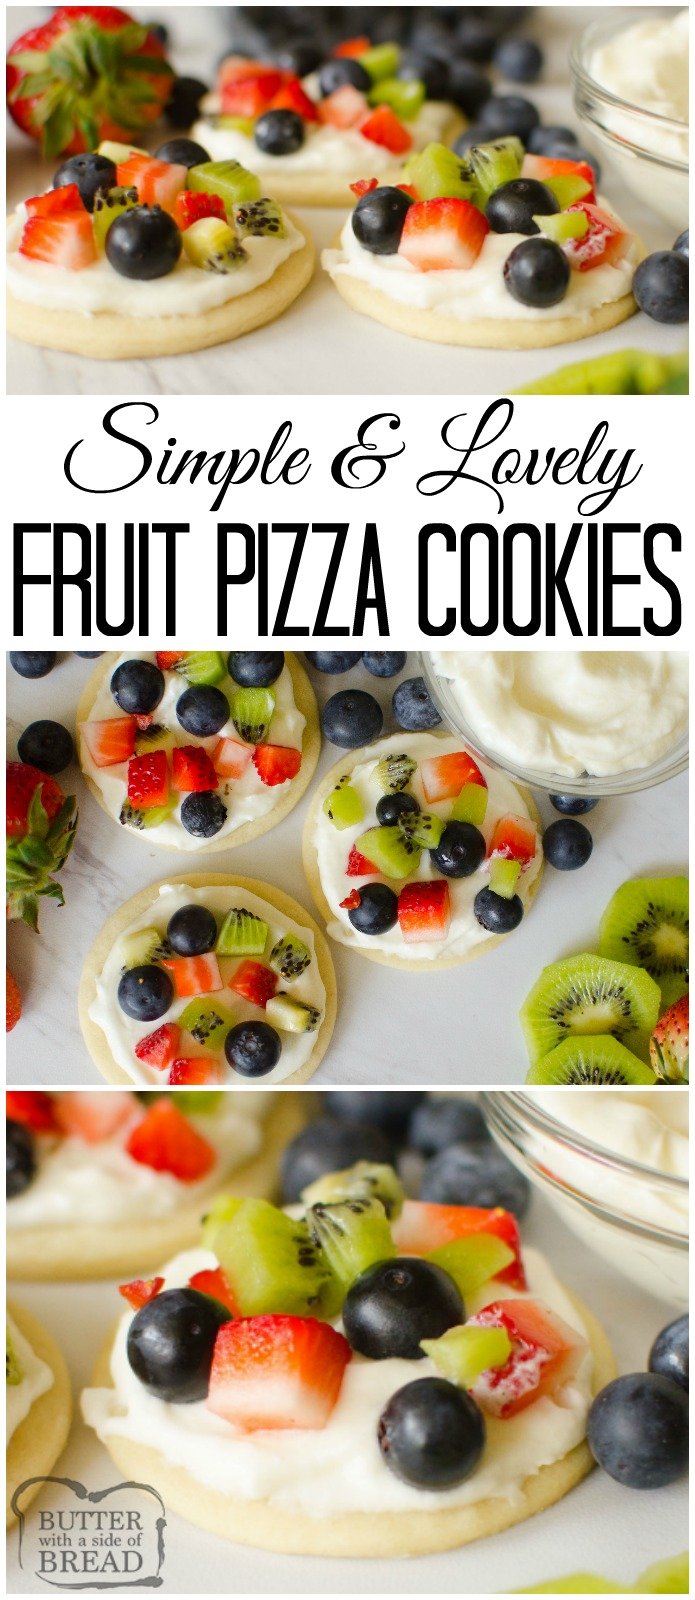 Fruit Pizza Cookies are all the goodness you get in a fruit pizza in cookie form! Soft sugar cookie crust, topped with sweet cream & your favorite fruits; strawberries, raspberries, blueberries, kiwi, blackberries, mango.. the possibilities are endless! #fruit #pizza #cookies #fruitpizza #dessert #recipe #baking #food #cookie #berries from BUTTER WITH A SIDE OF BREAD